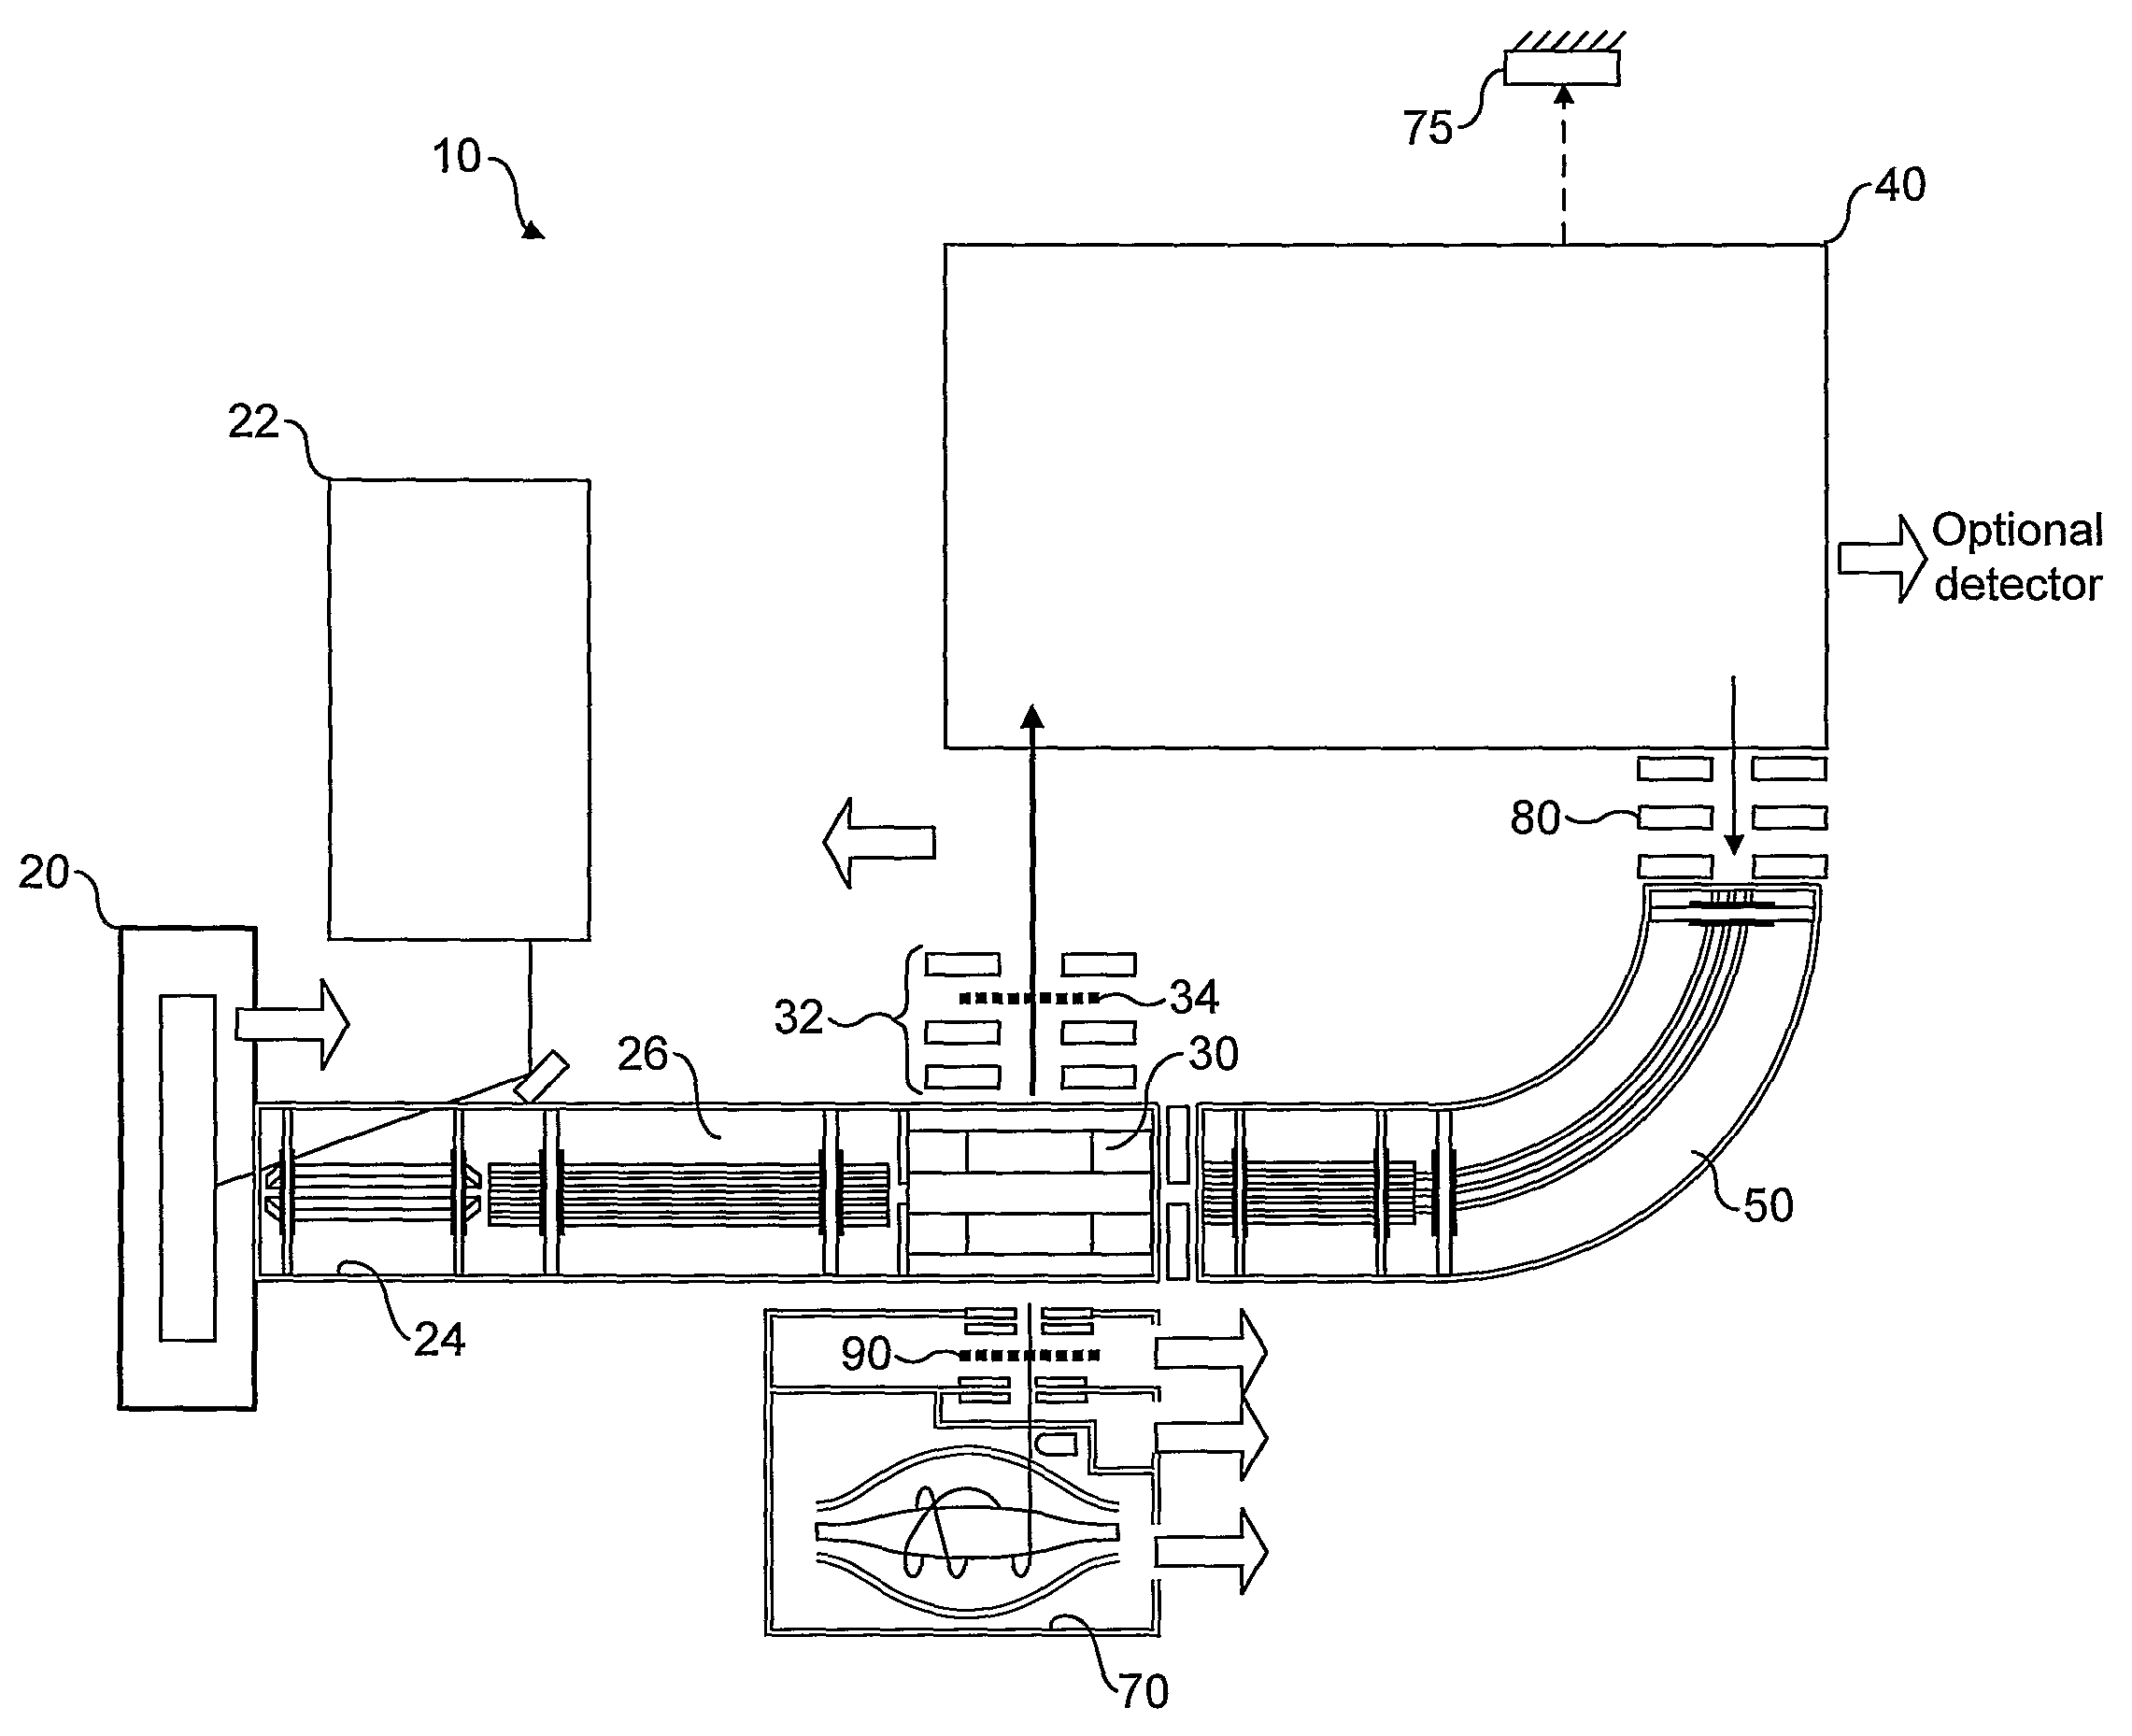 Mass spectrometer with ion storage device